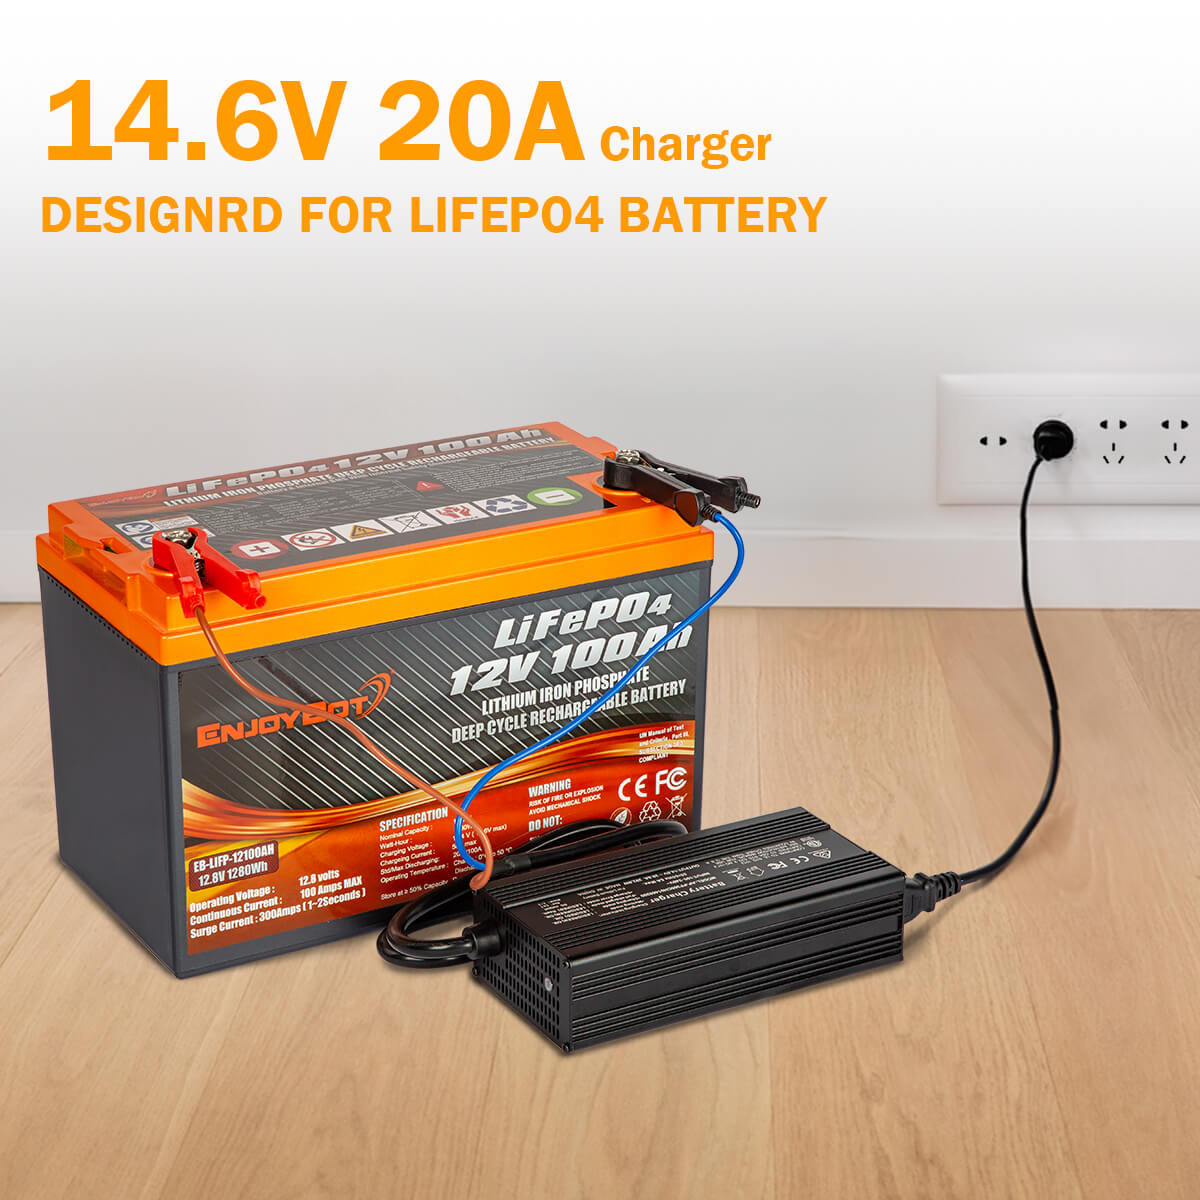 Enjoybot 14.6V-20A LiFePO4 Lithium Battery Charger Alligator Clamps –  Enjoybot Official Store